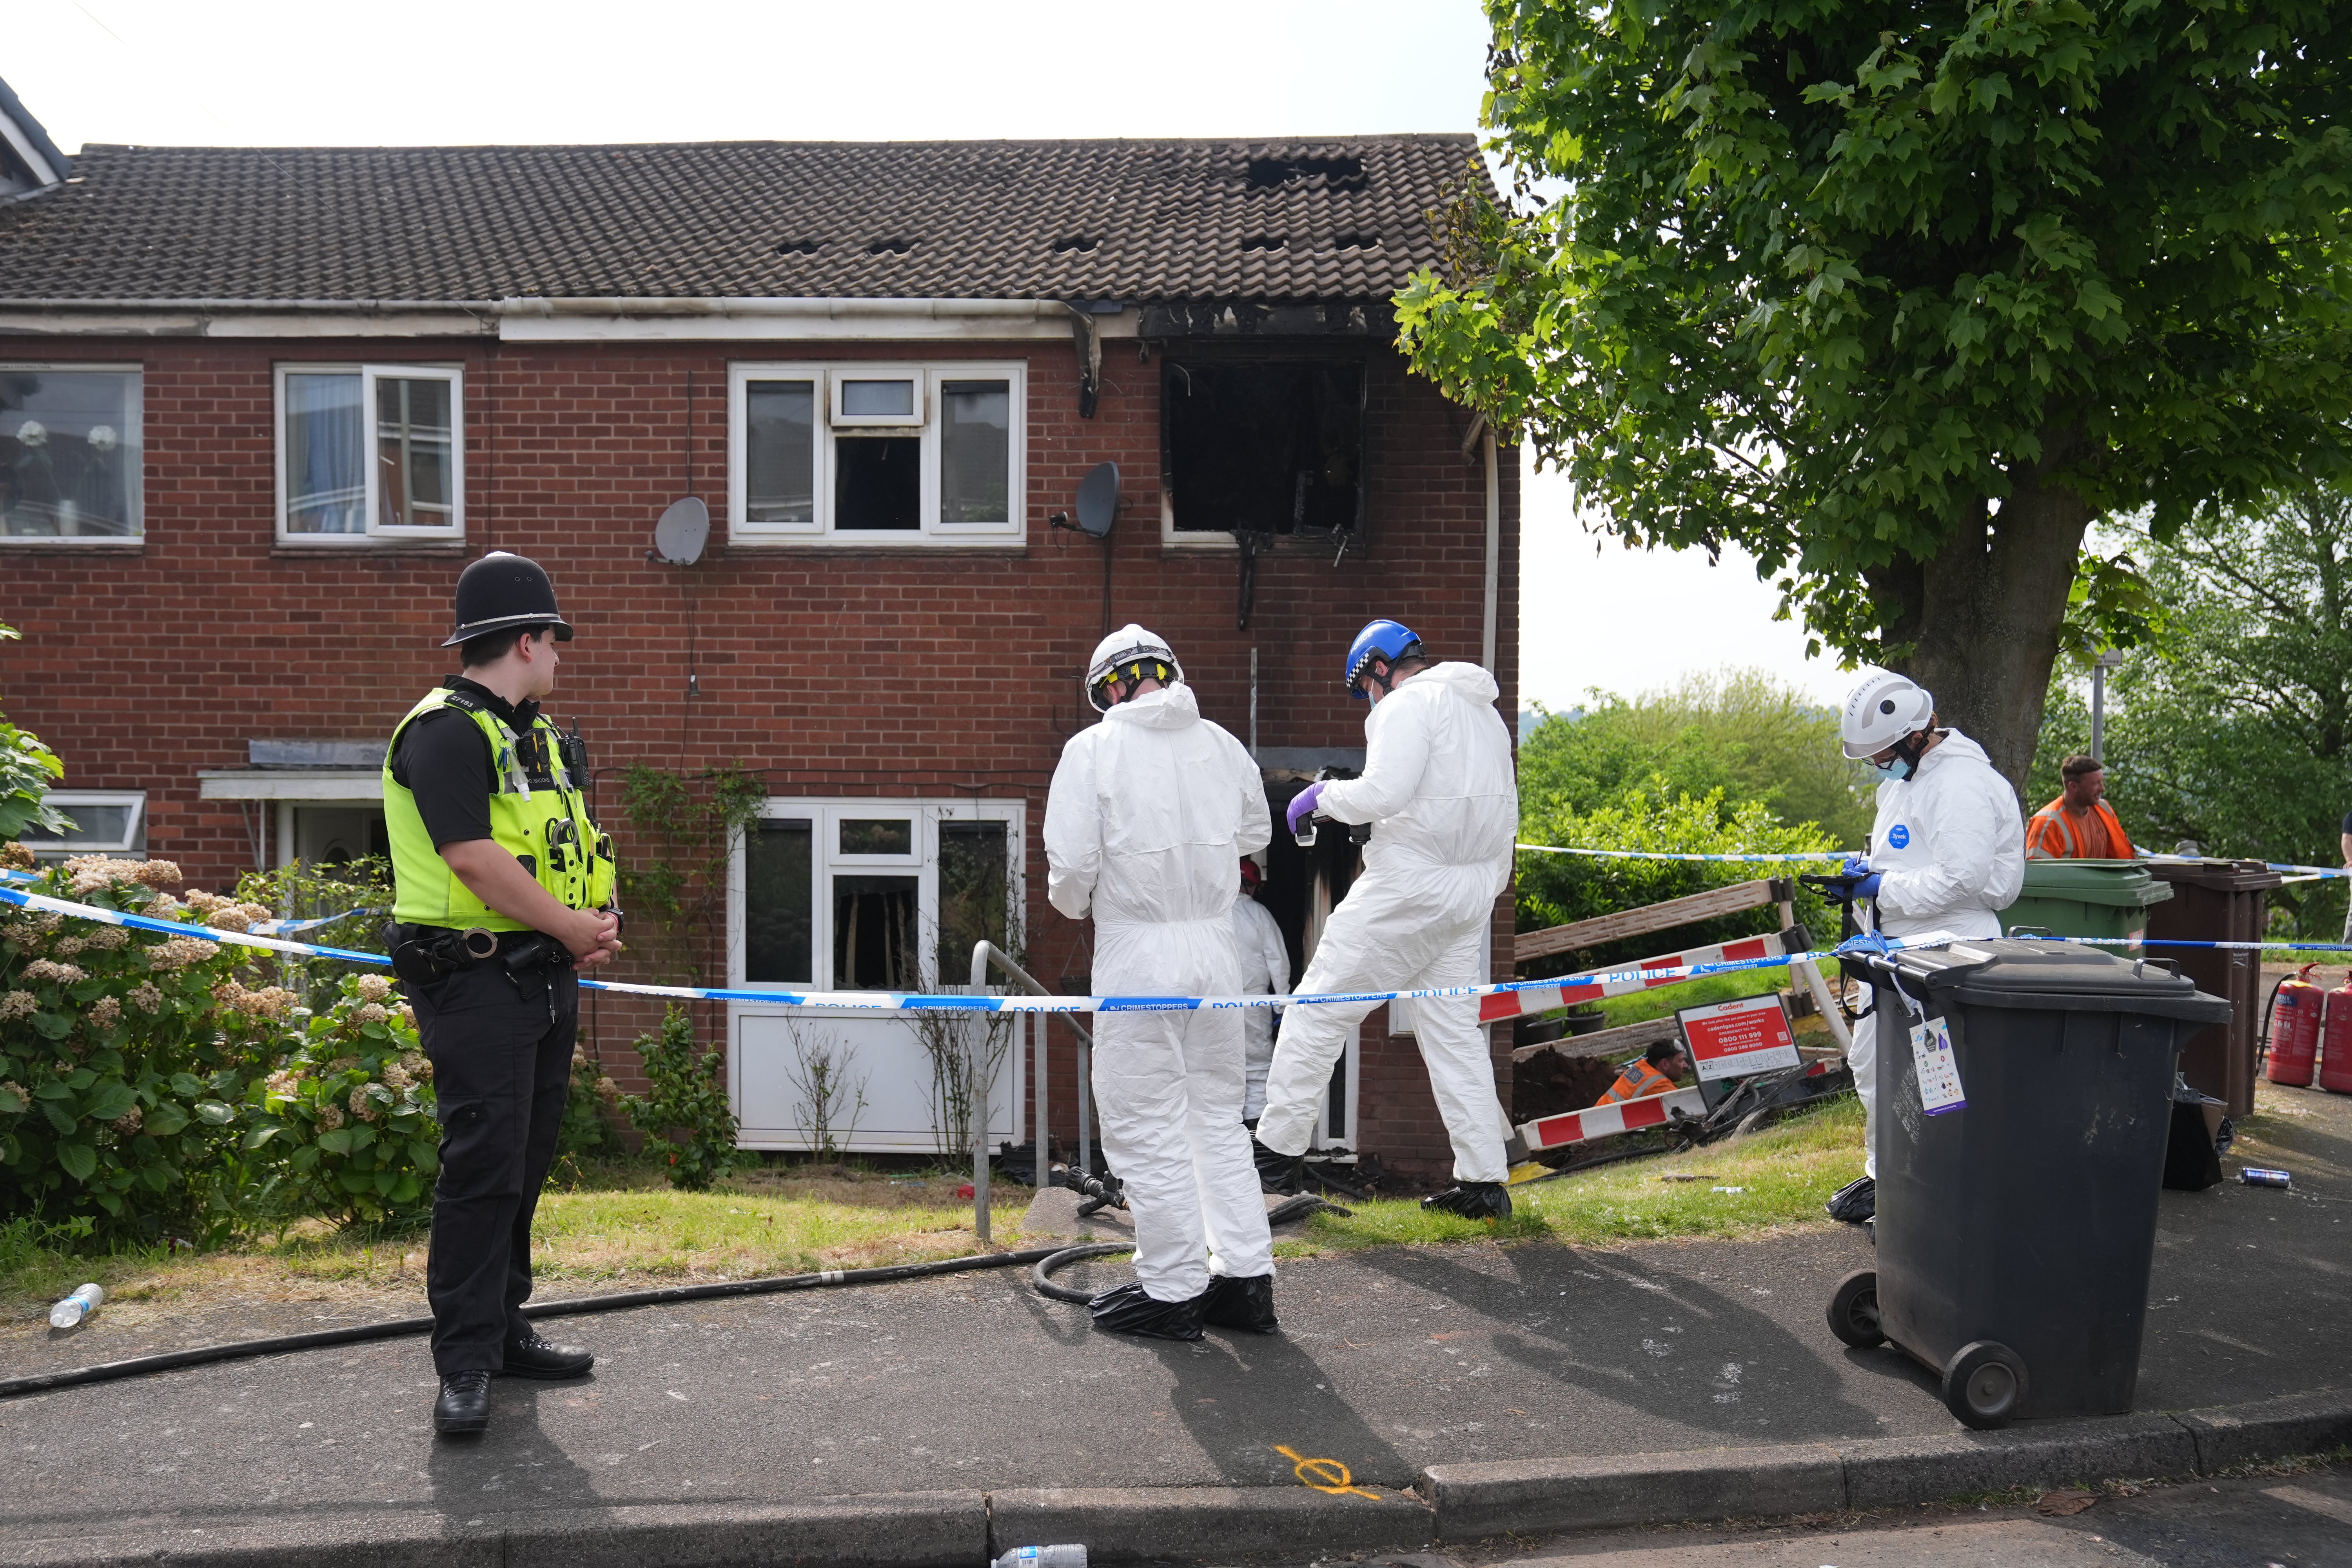 Forensic officers at the scene of a house fire in Wolverhampotn where two people died on Saturday morning